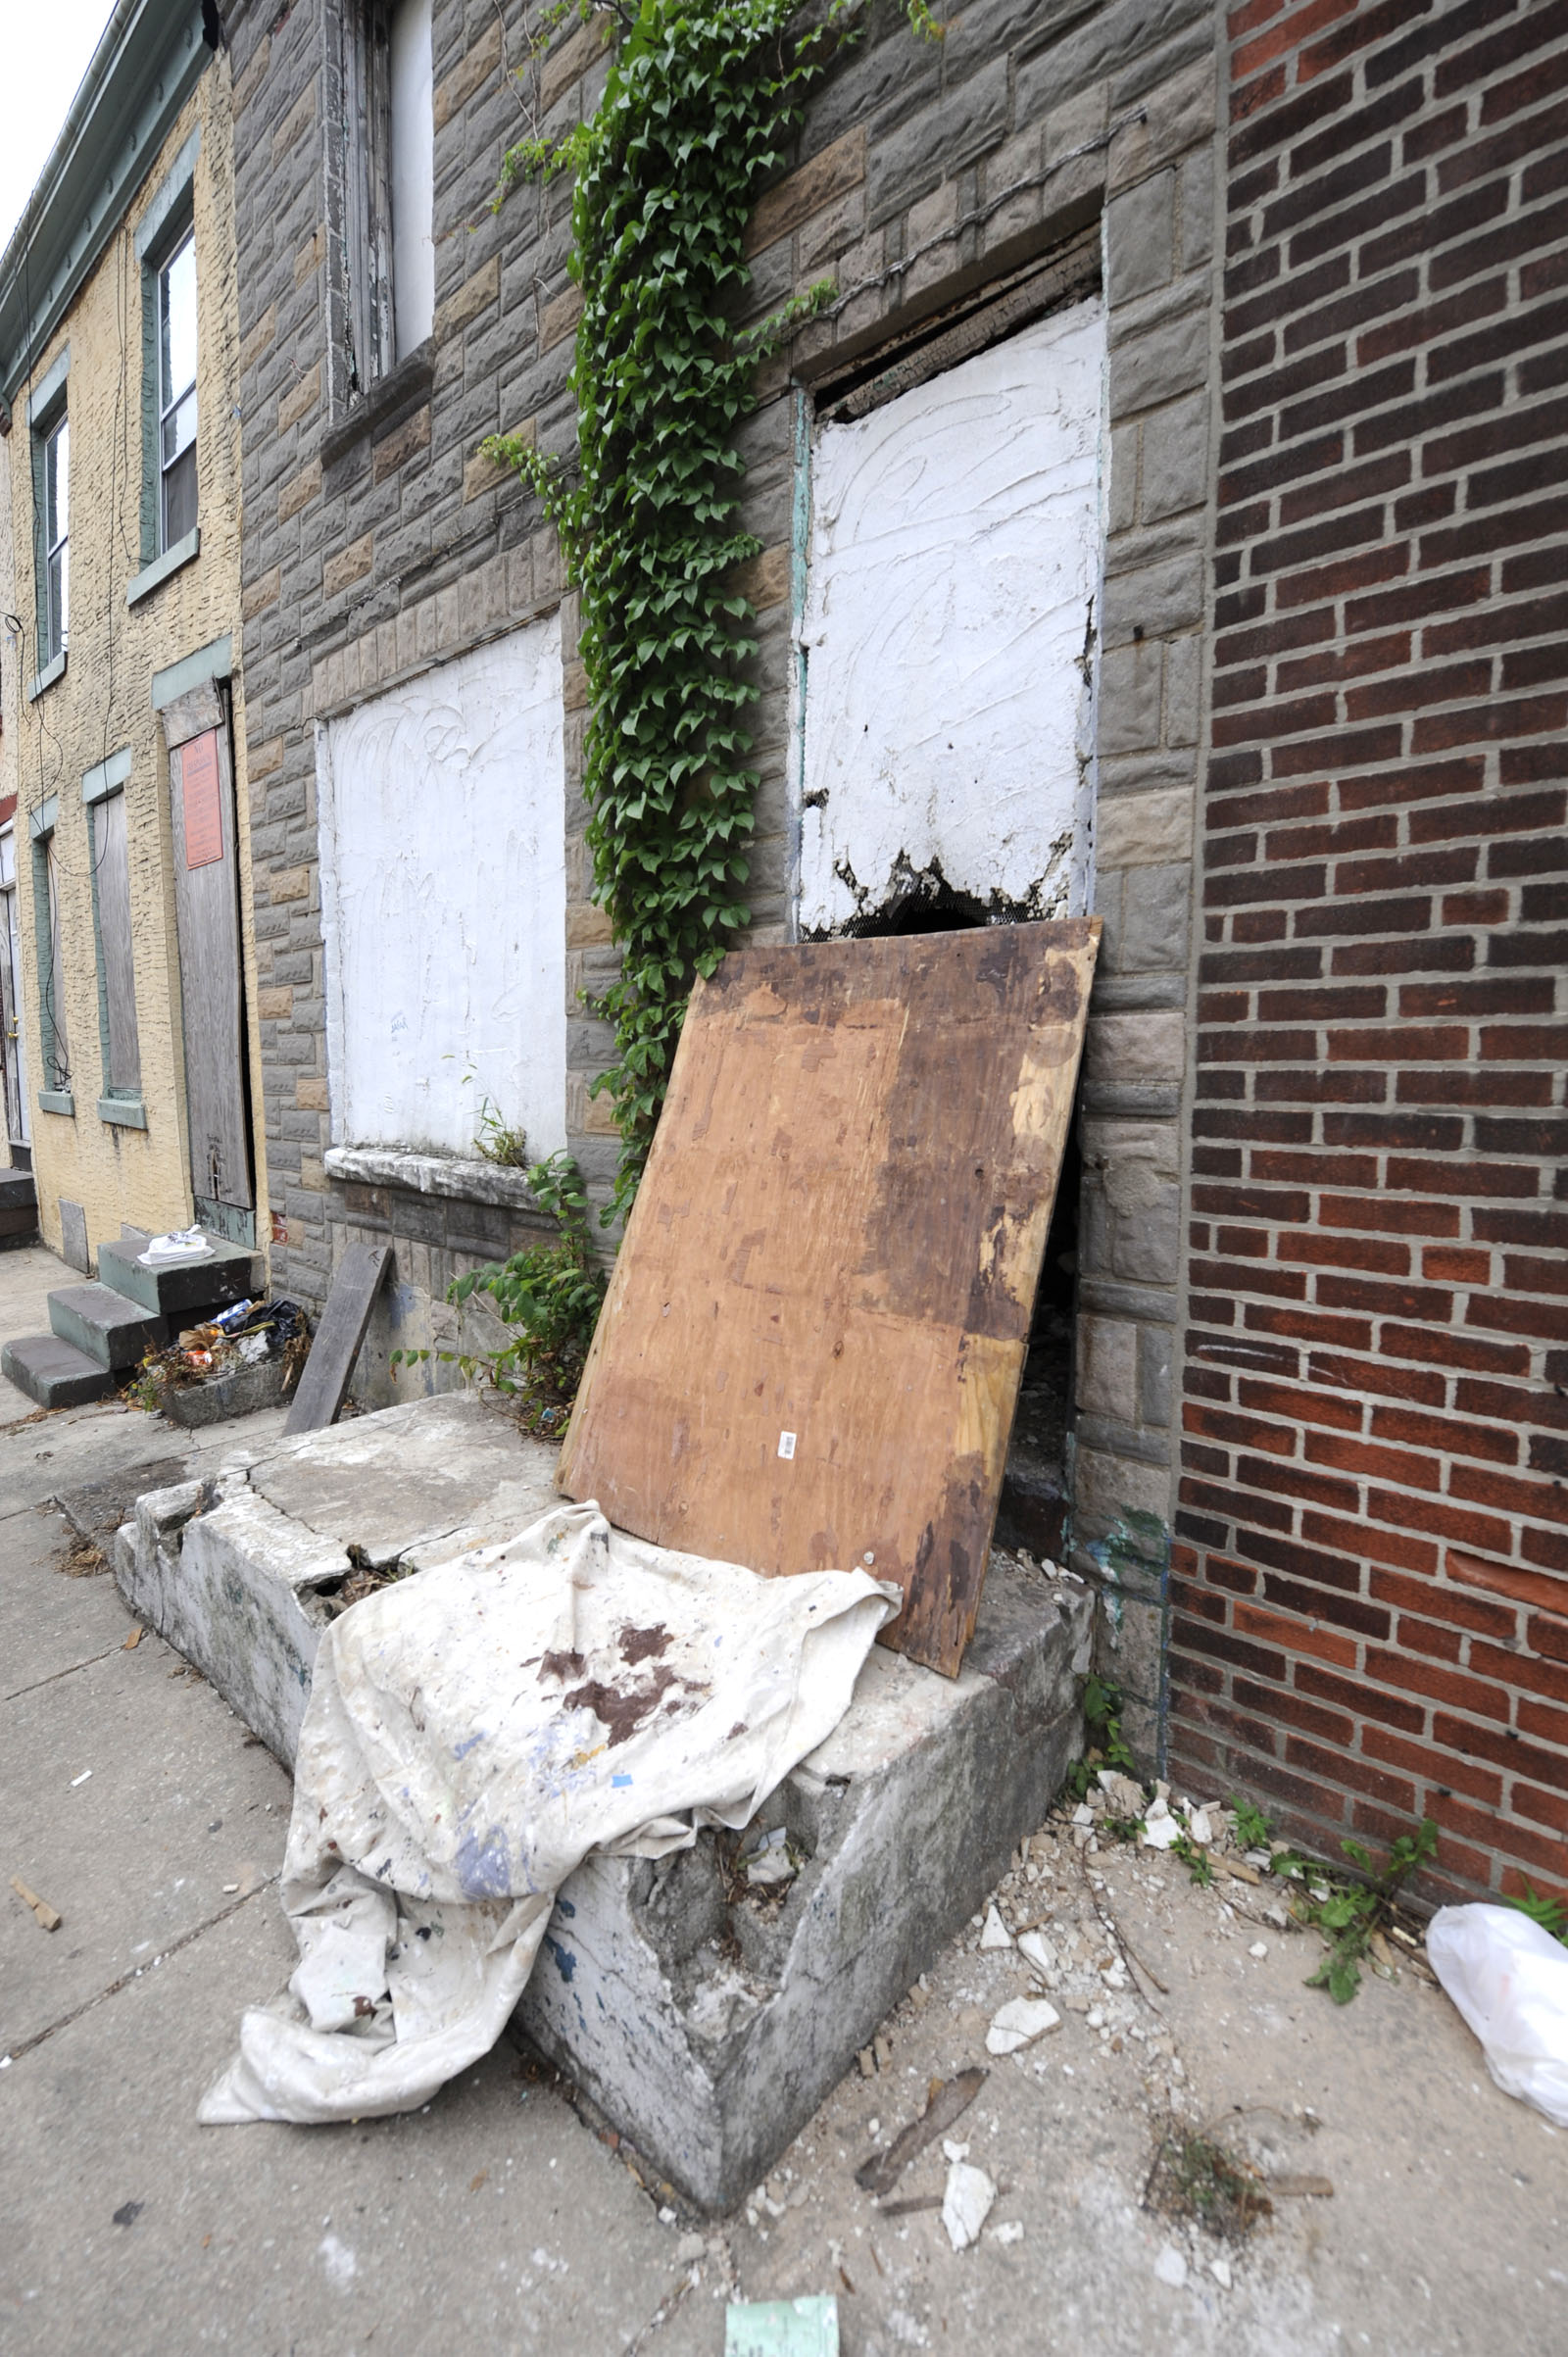 An abandoned tax delinquent home on the 2300 block of Gerritt Street. (Clem Murray / Inquirer)